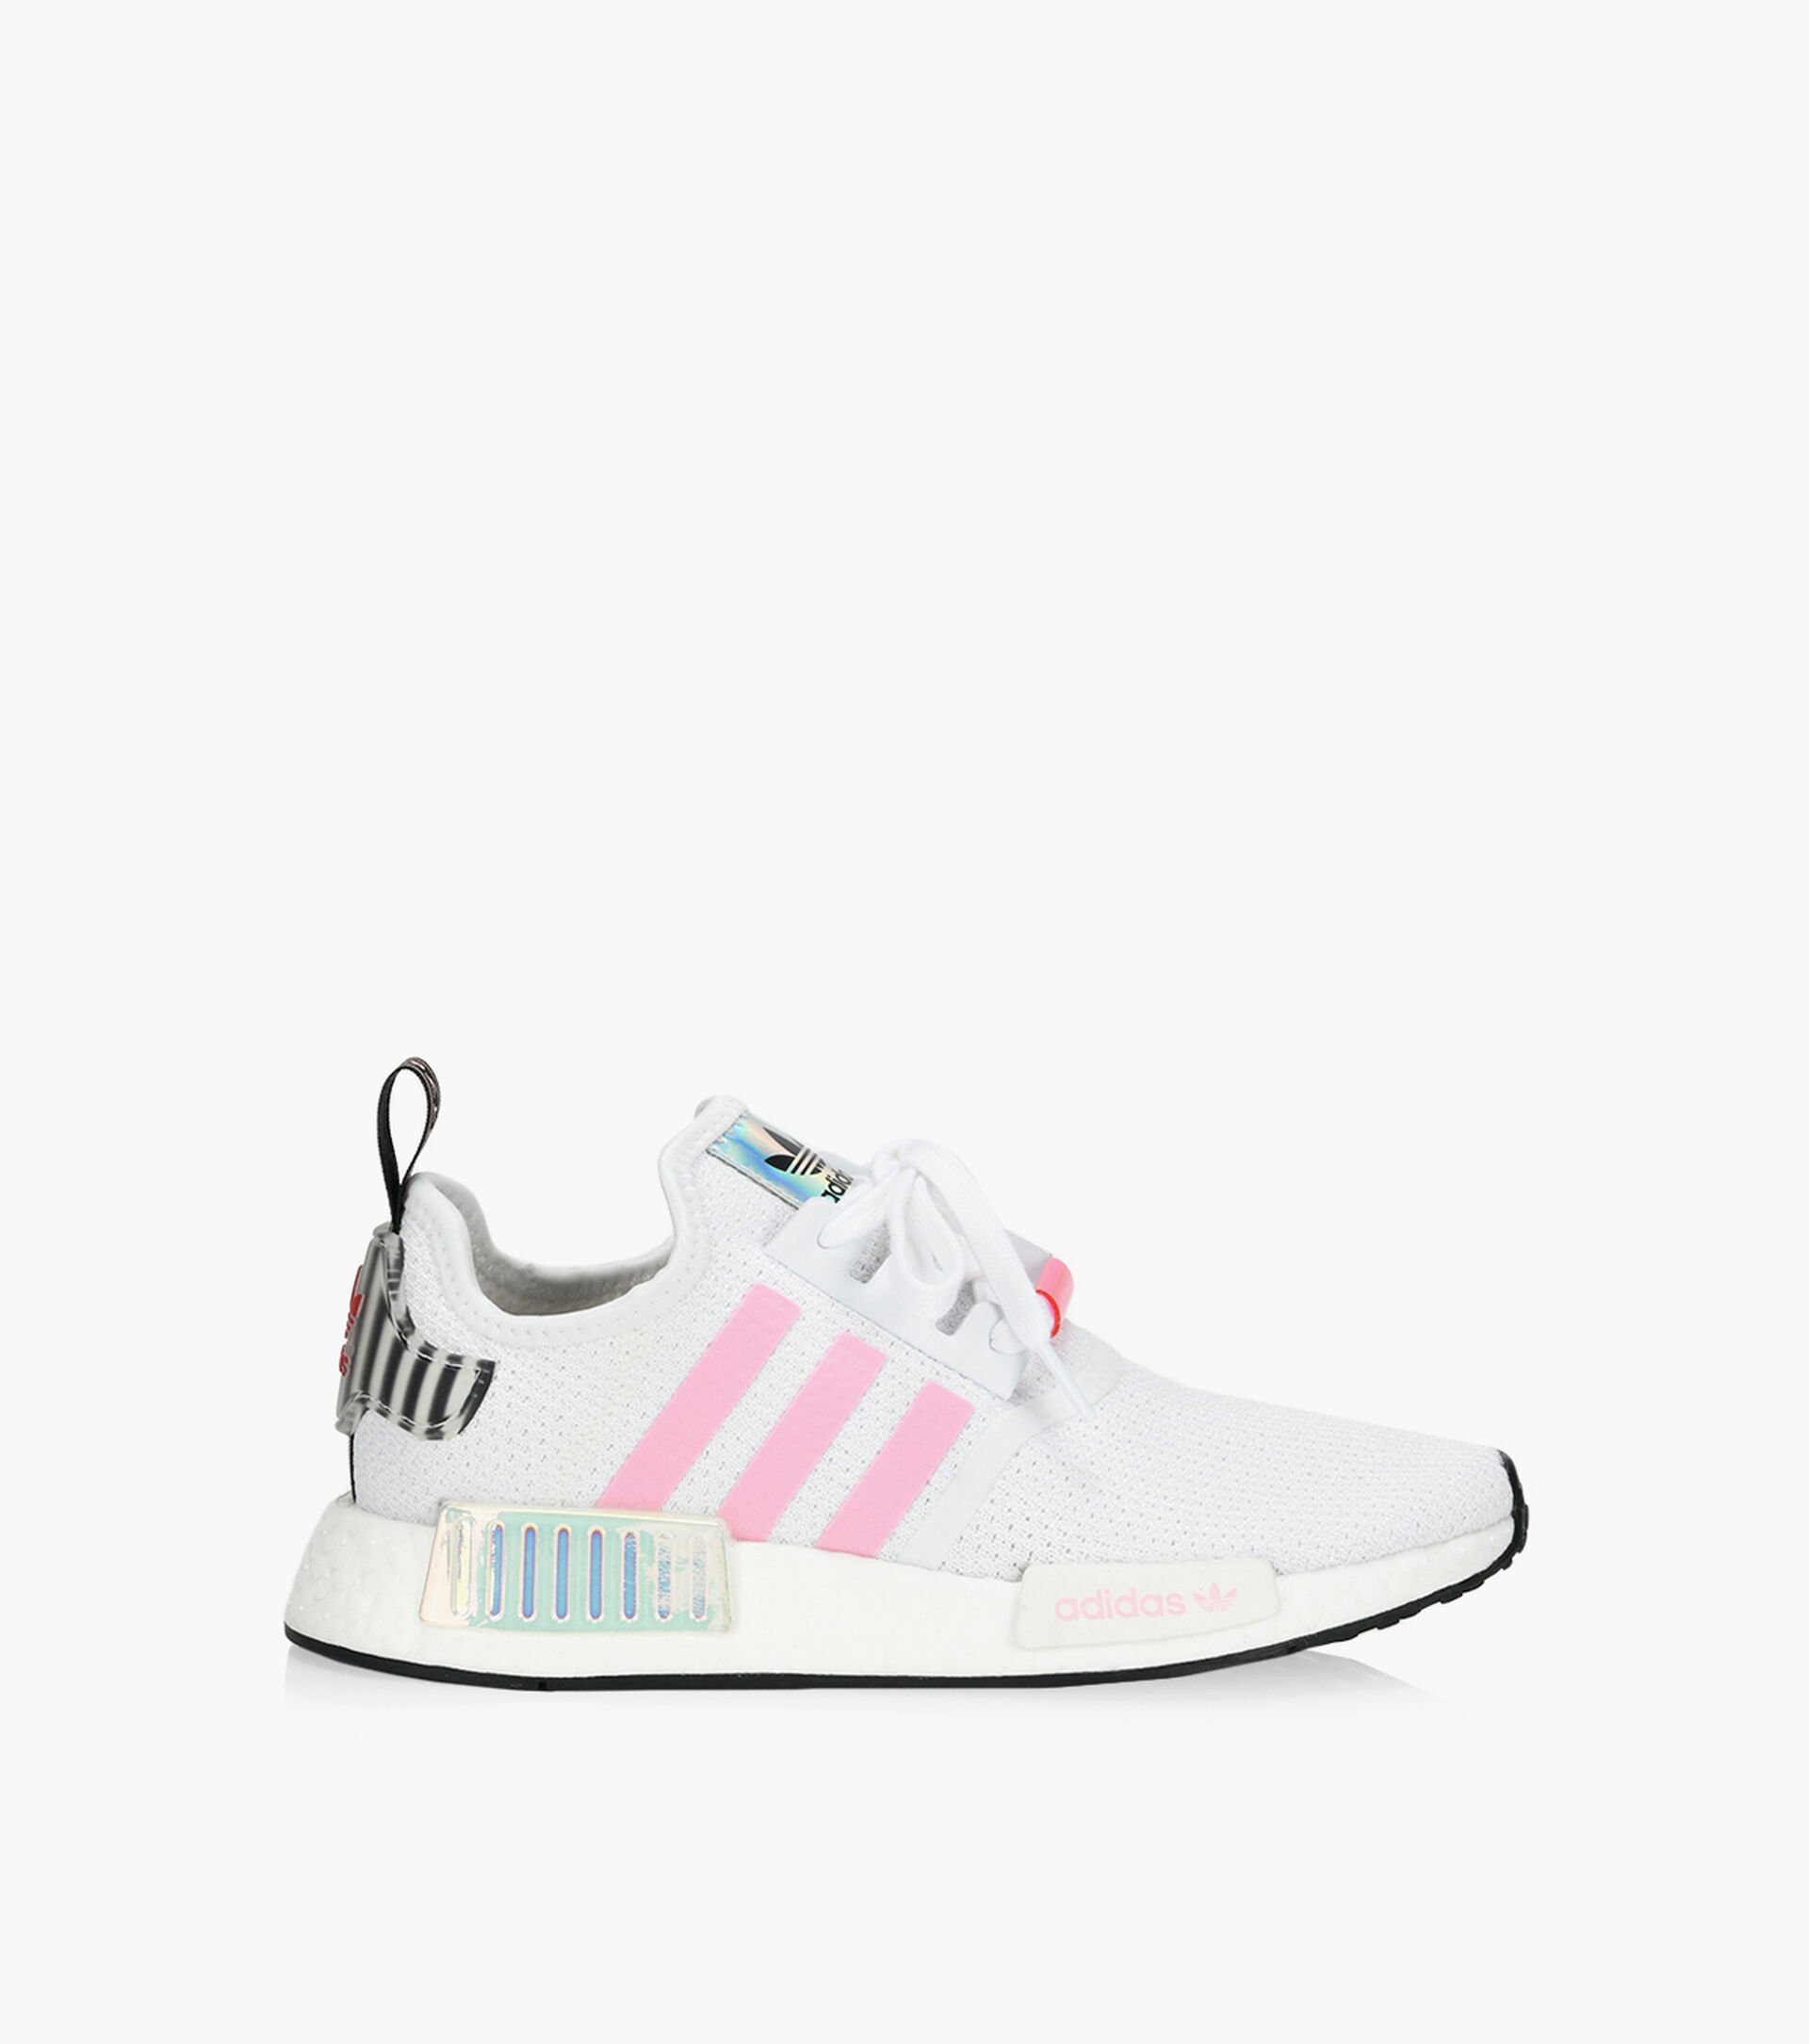 begå Feje udtrykkeligt ADIDAS NMD R1 W - White Fabric | Browns Shoes